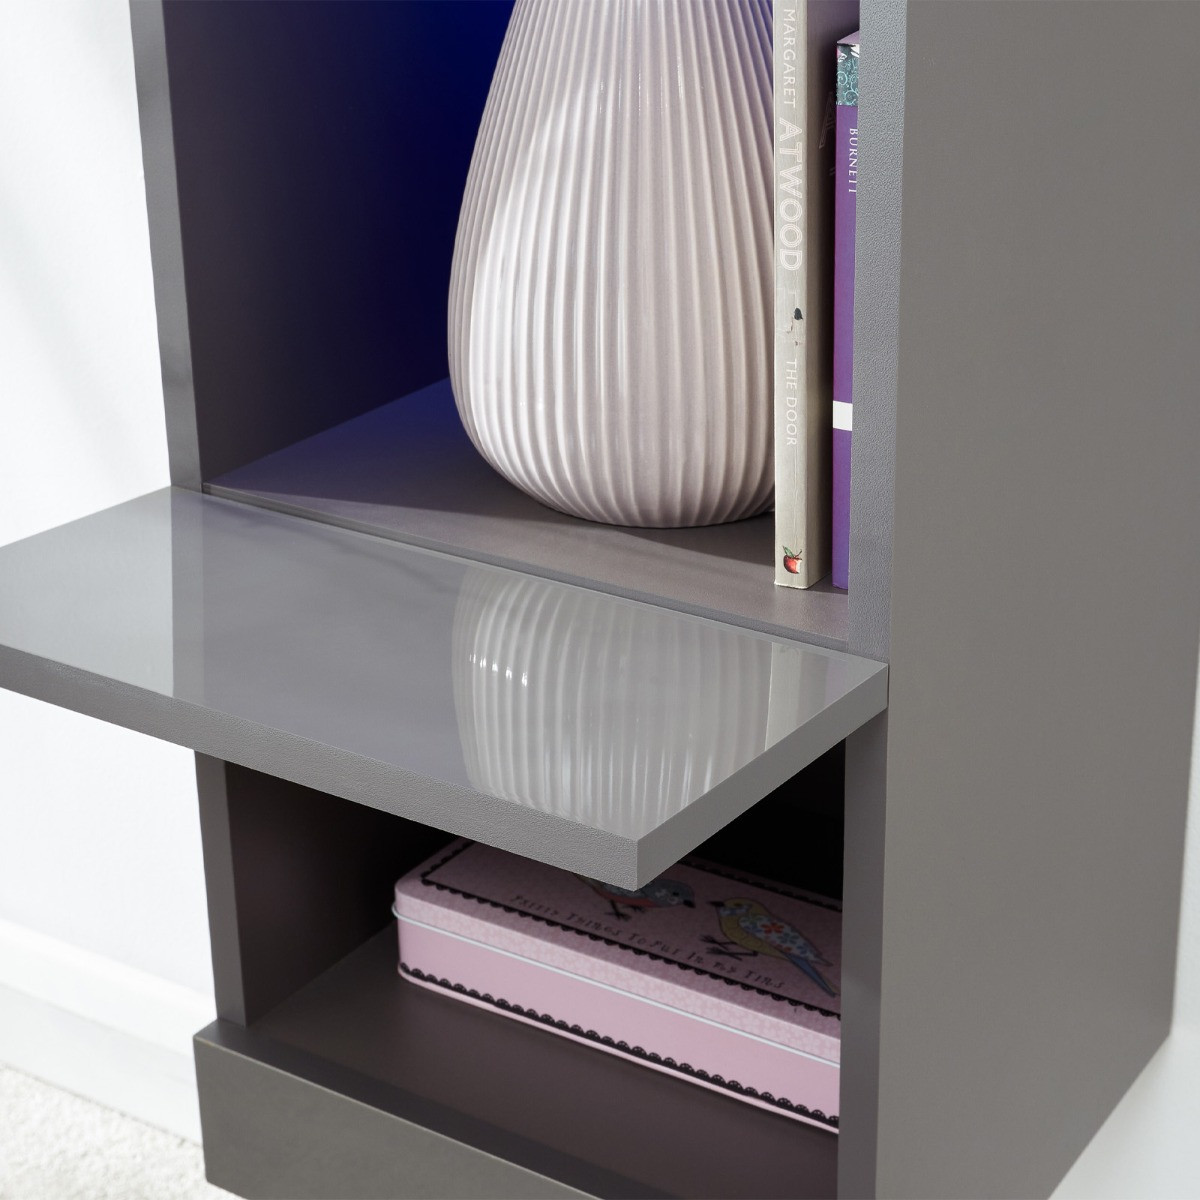 Galicia Wall Mounted Tall Shelf Unit With LED Lights - Grey>